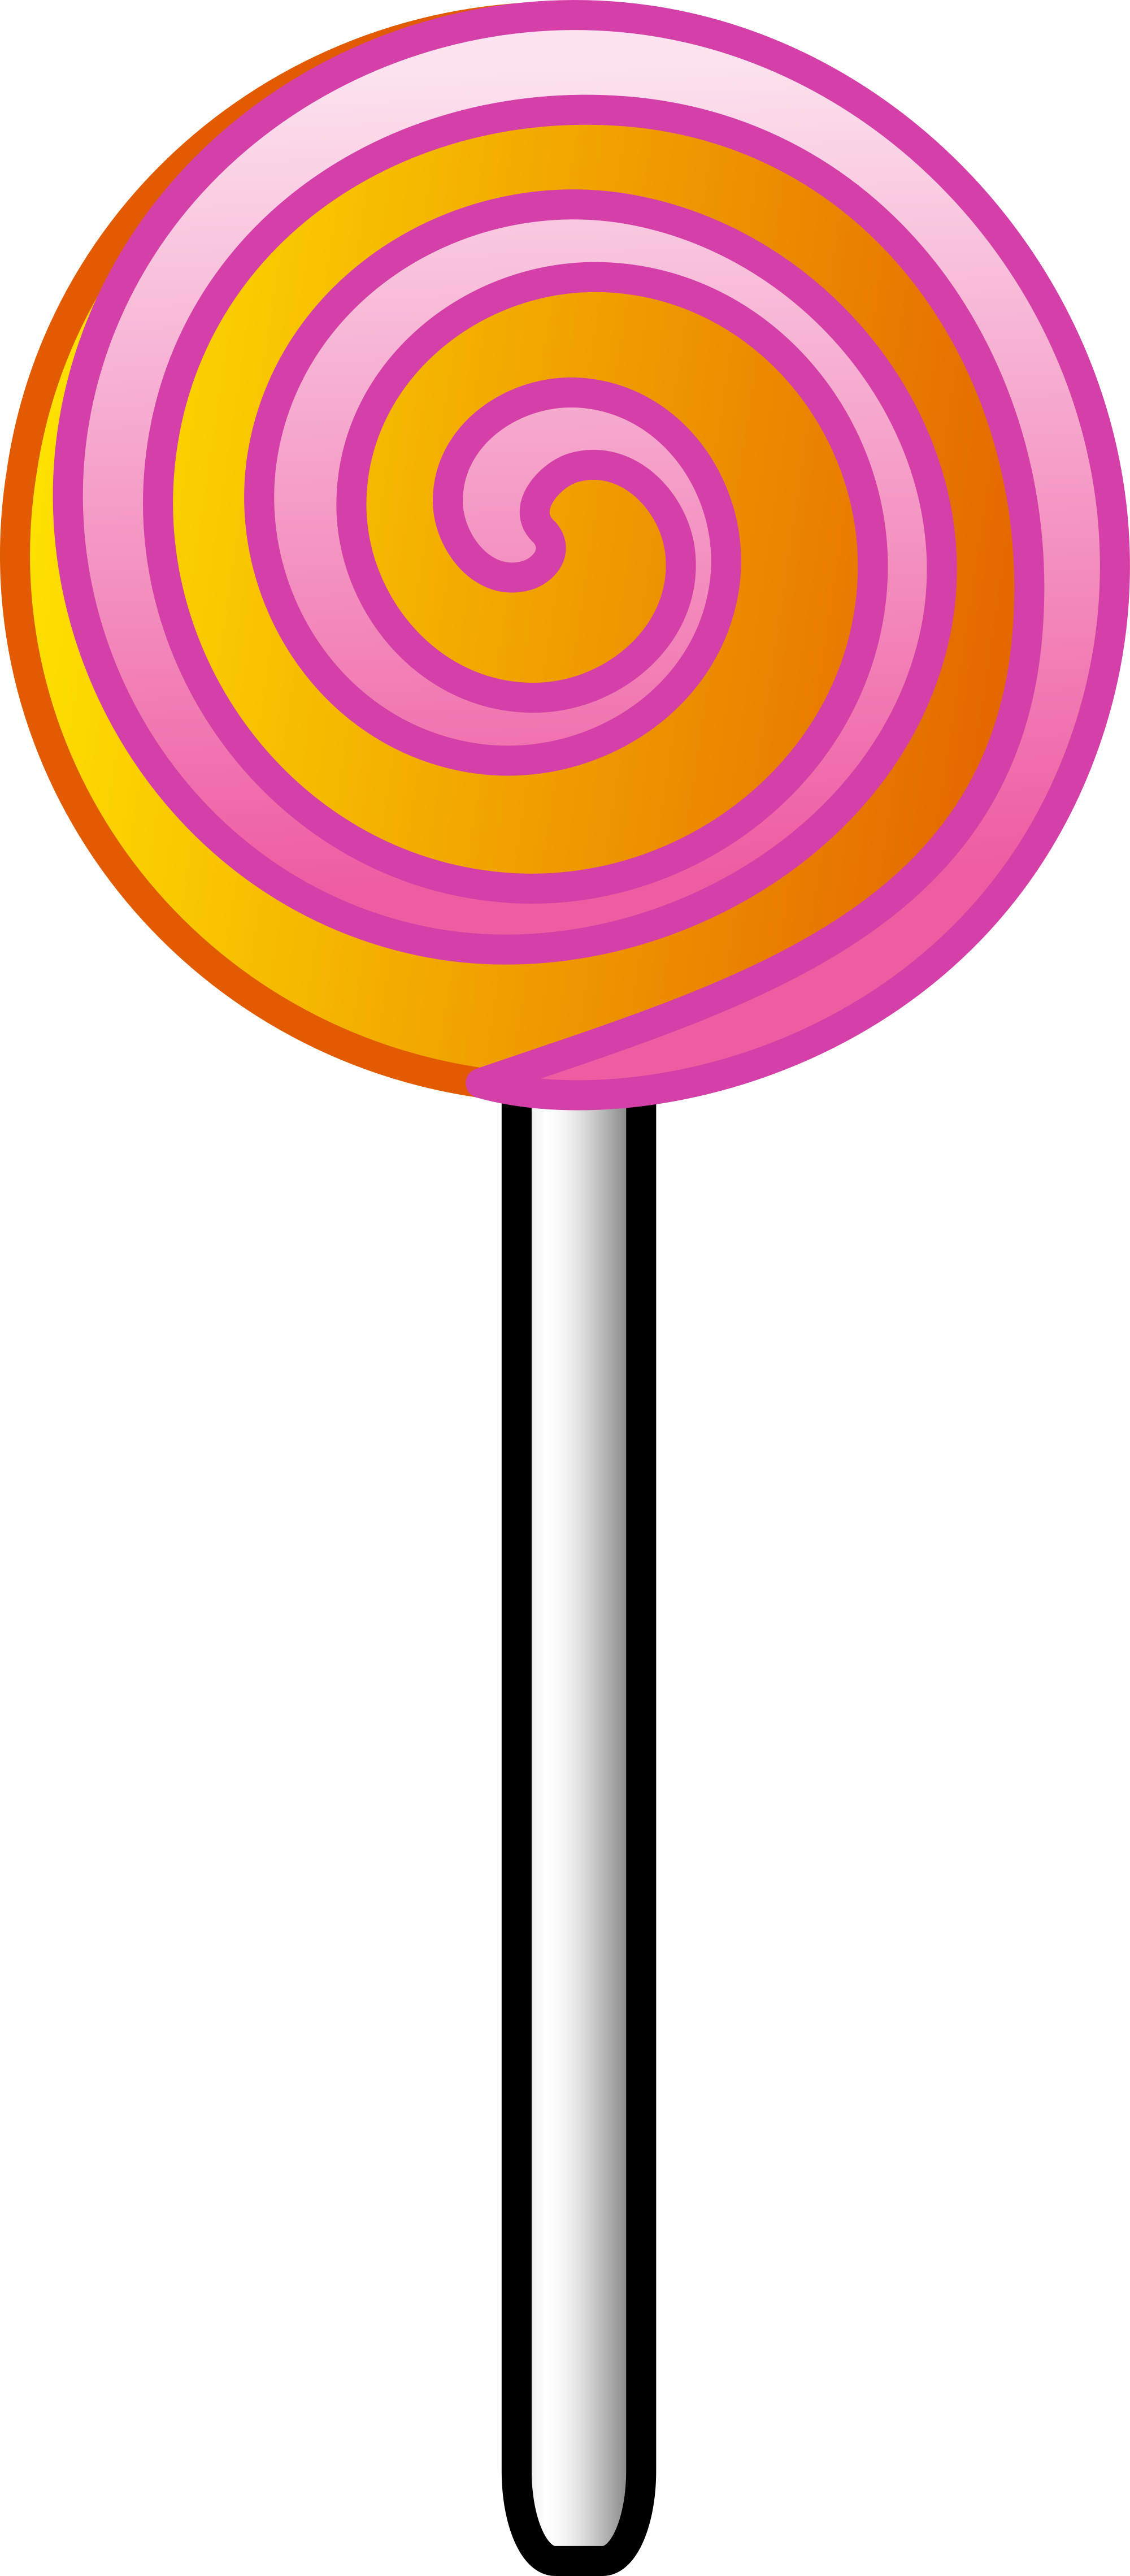 Candyland clipart lollypop. Free lollipop candy cliparts